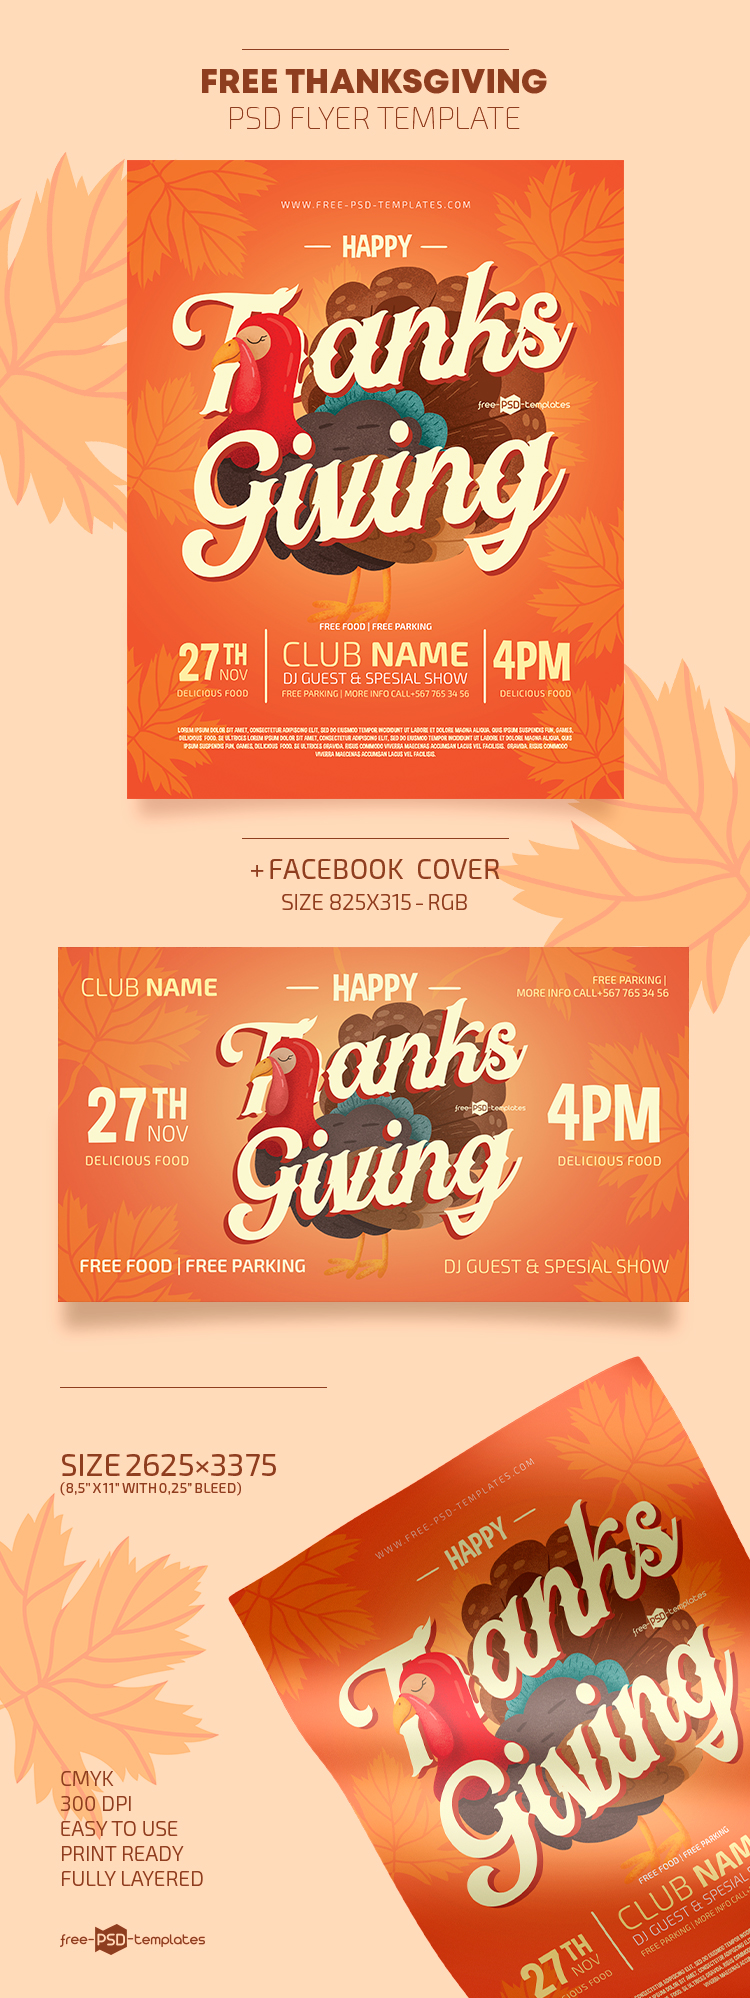 Free Thanksgiving Flyer Template in PSD  Free PSD Templates For Thanksgiving Flyer Template Free